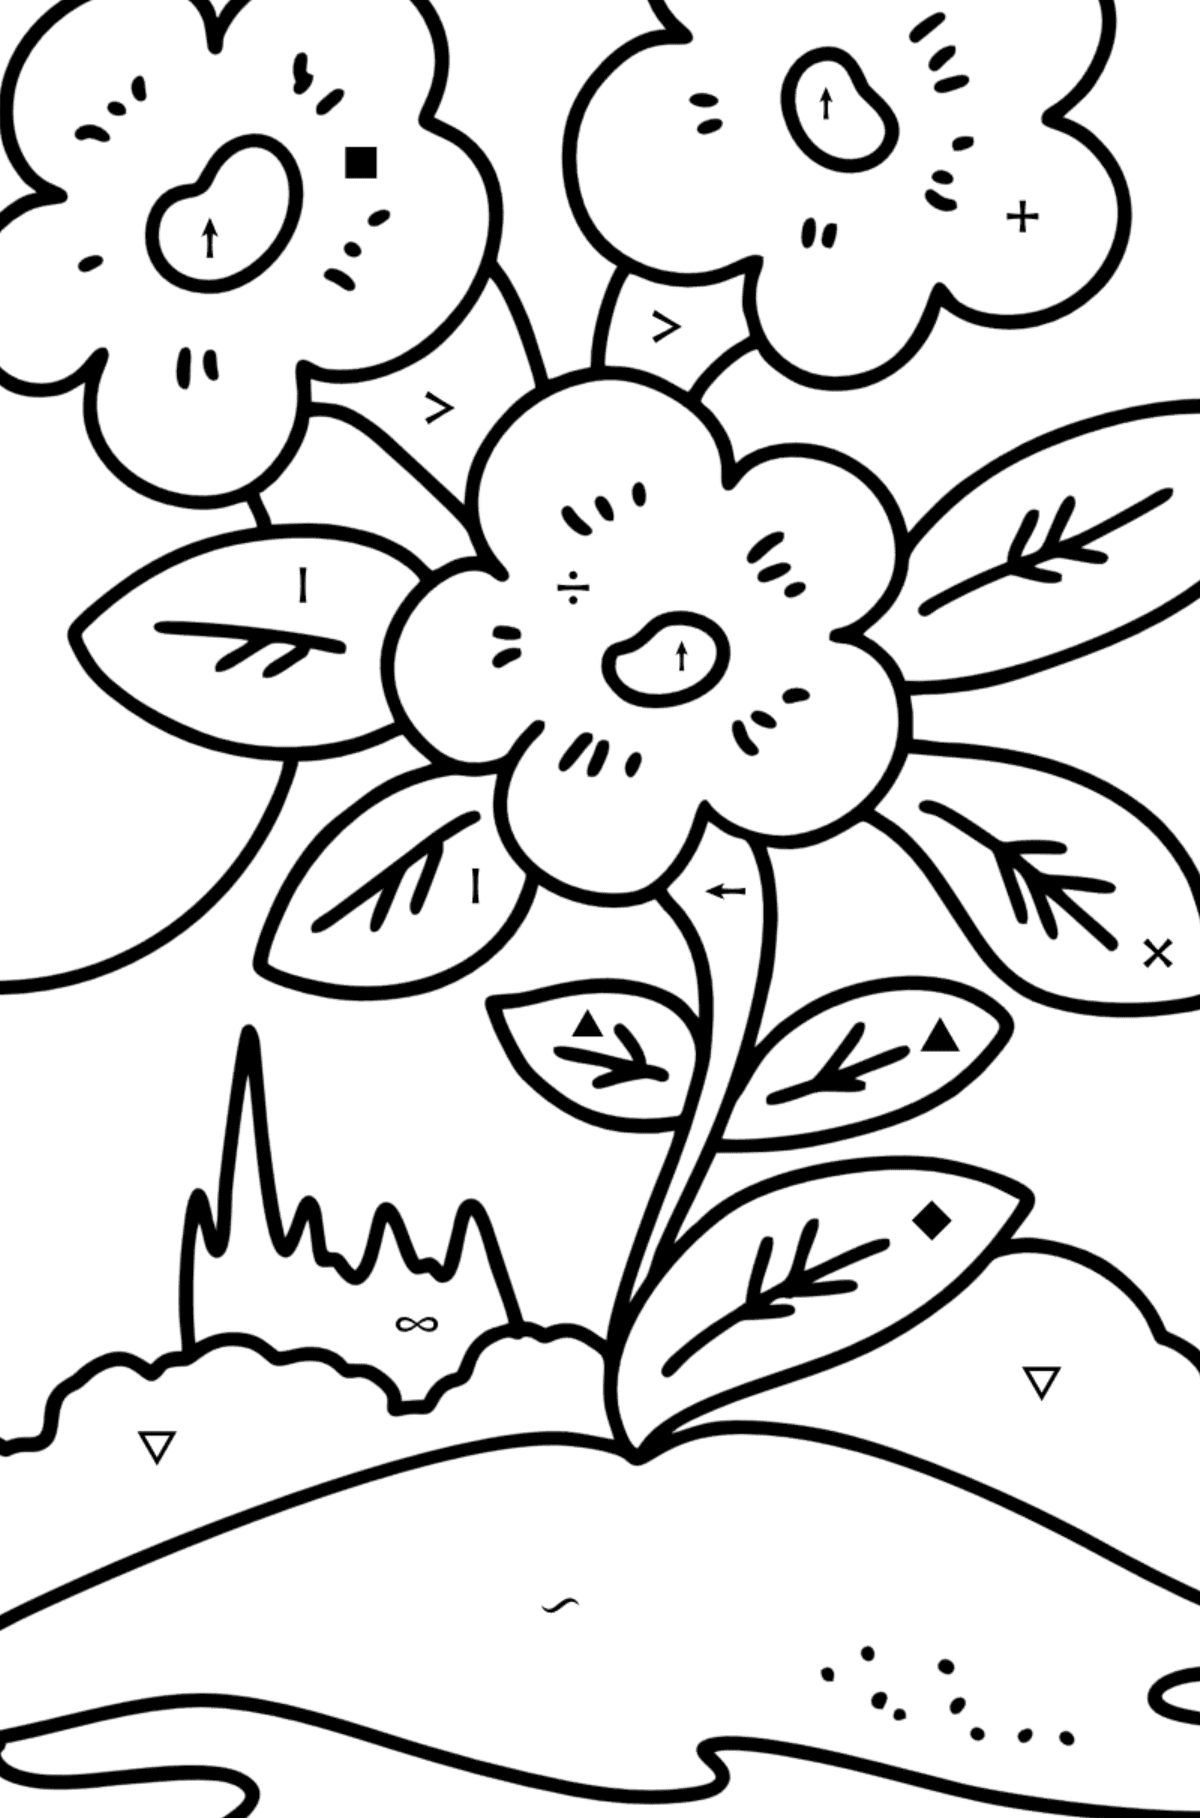 Spring flowers coloring page for Kids - Coloring by Symbols for Kids